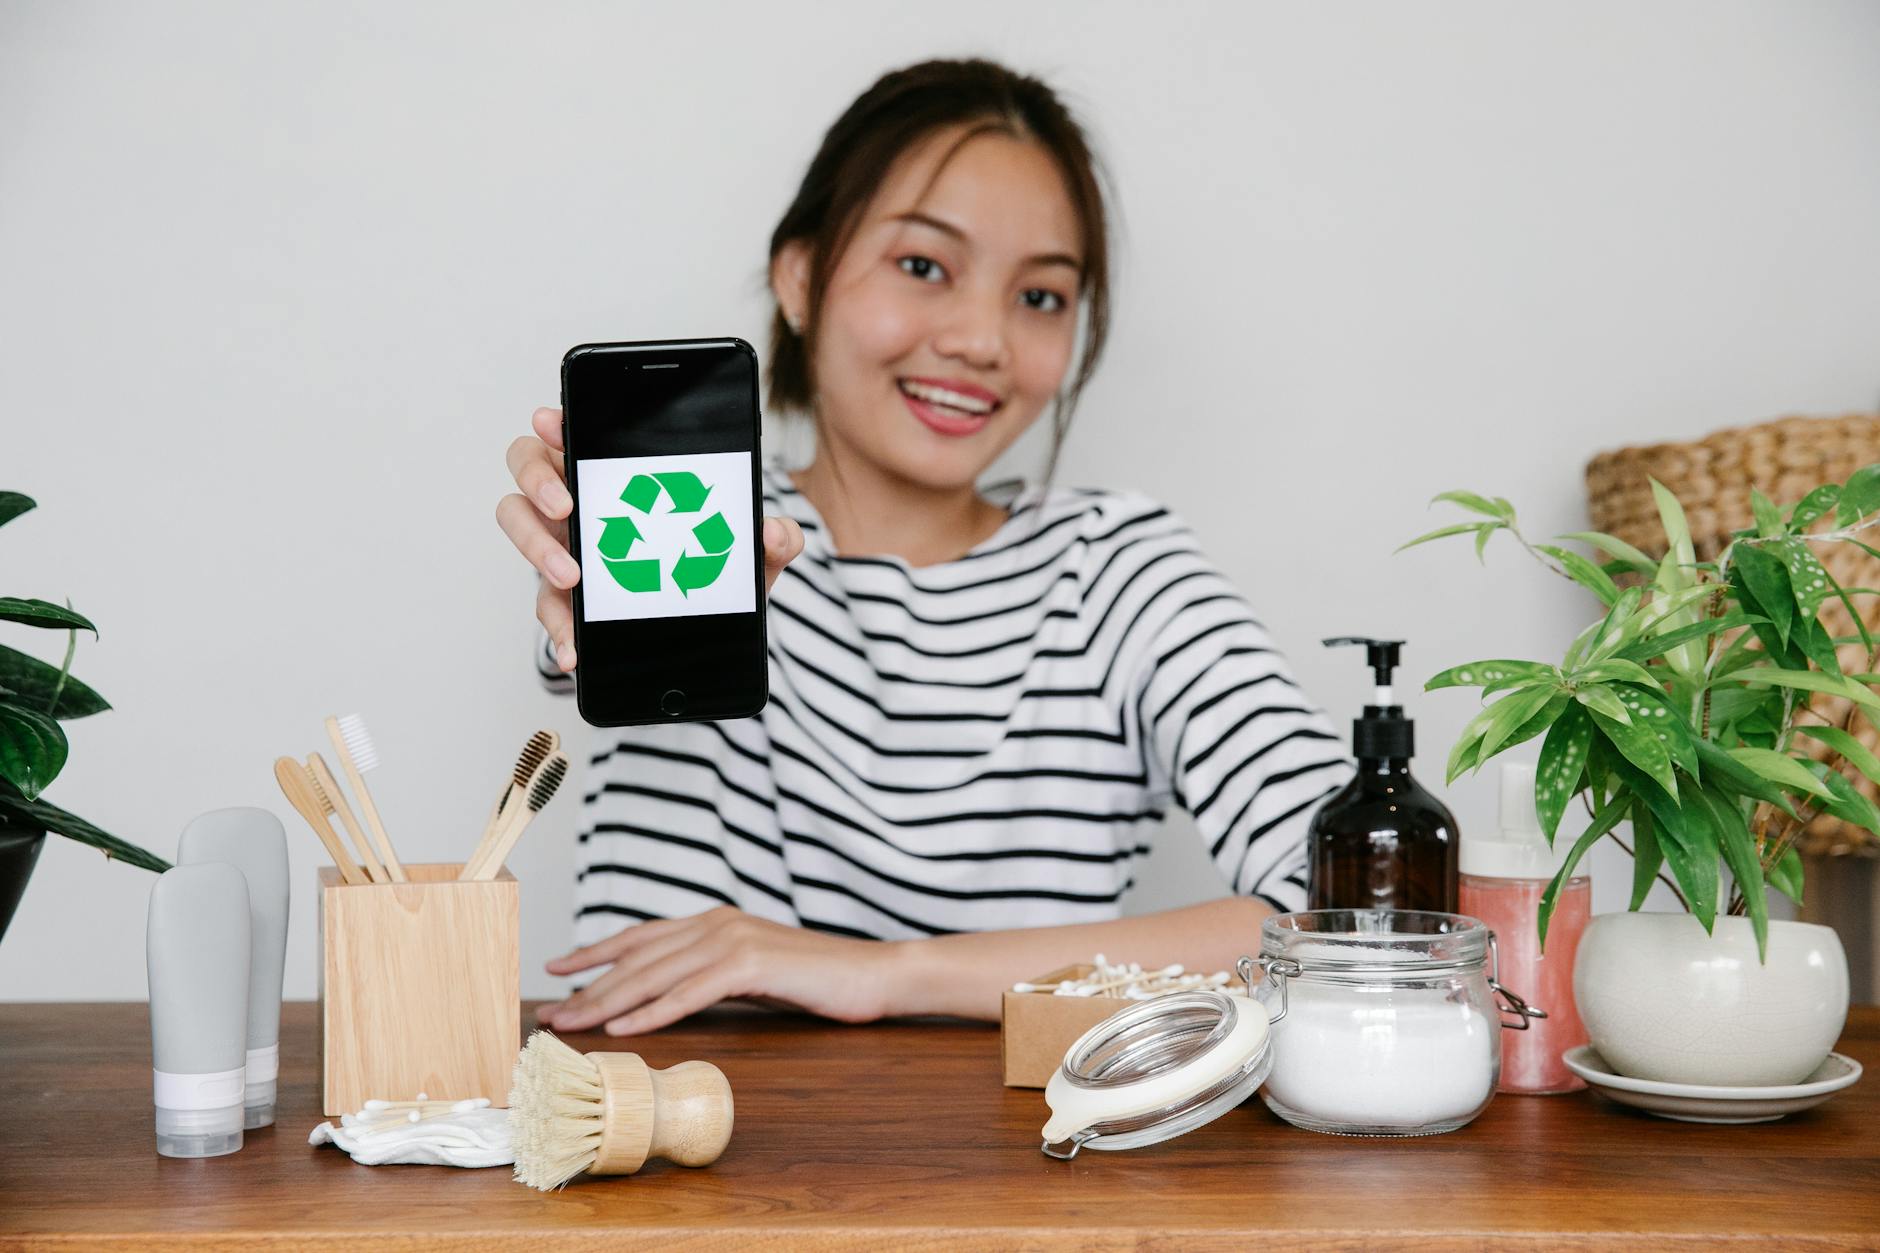 Smiling Asian woman demonstrating recycling symbol on smartphone while sitting at table with eco friendly cosmetic products and looking at camera